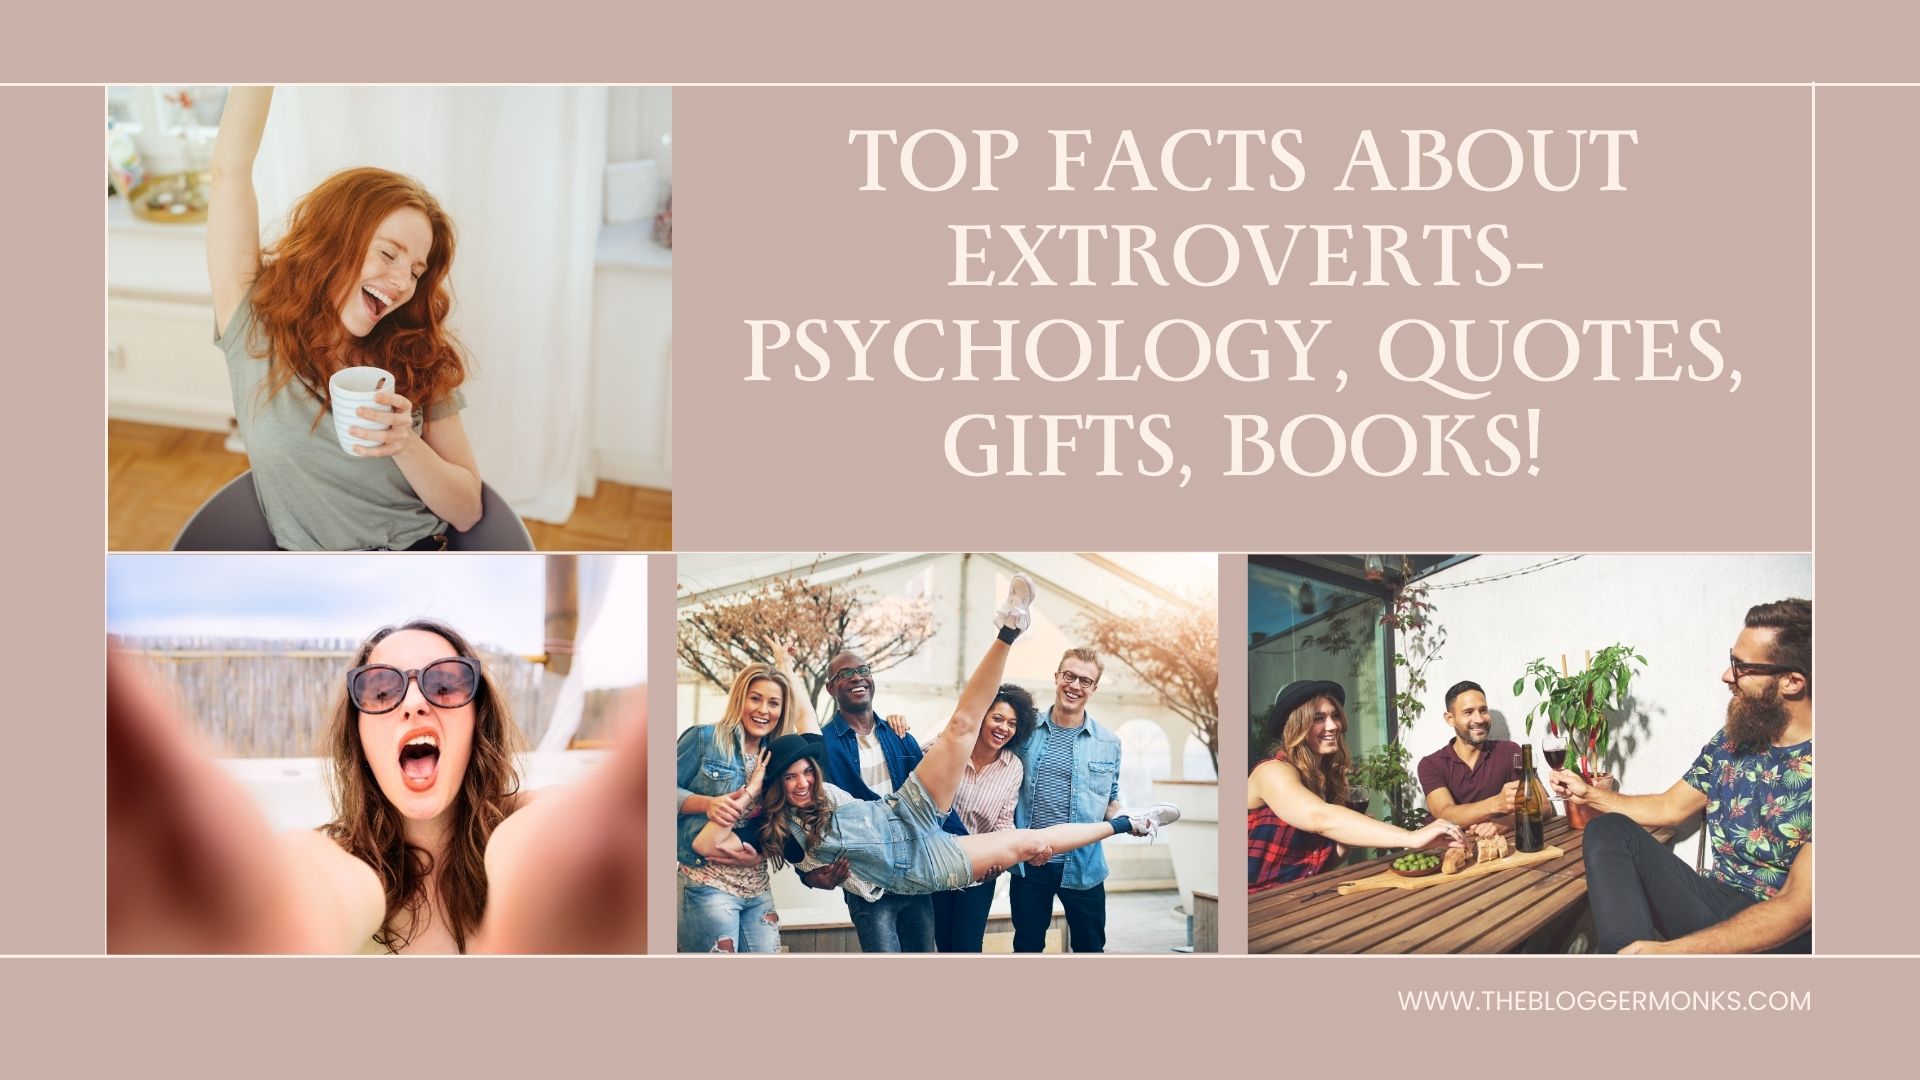 Top facts about extroverts